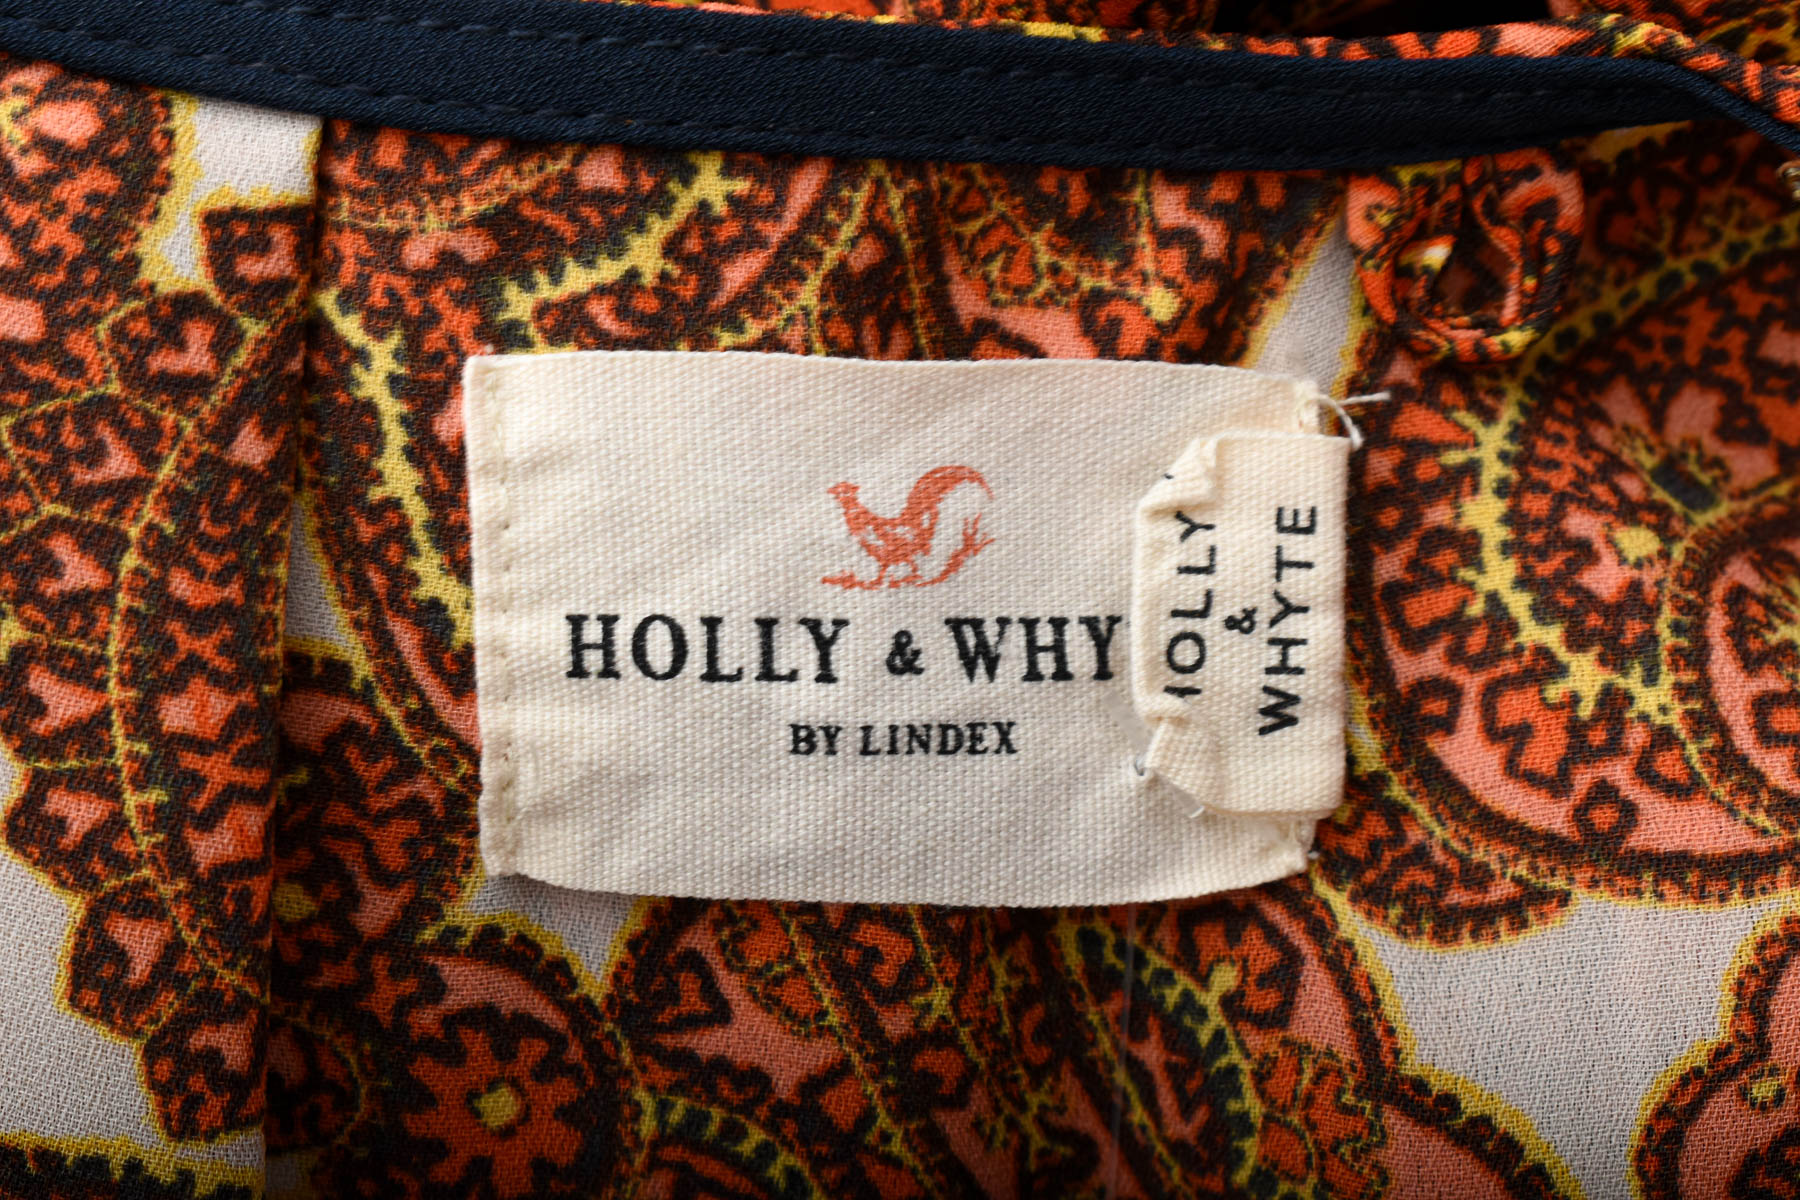 Women's shirt - HOLLY & WHITE BY LINDEX - 2